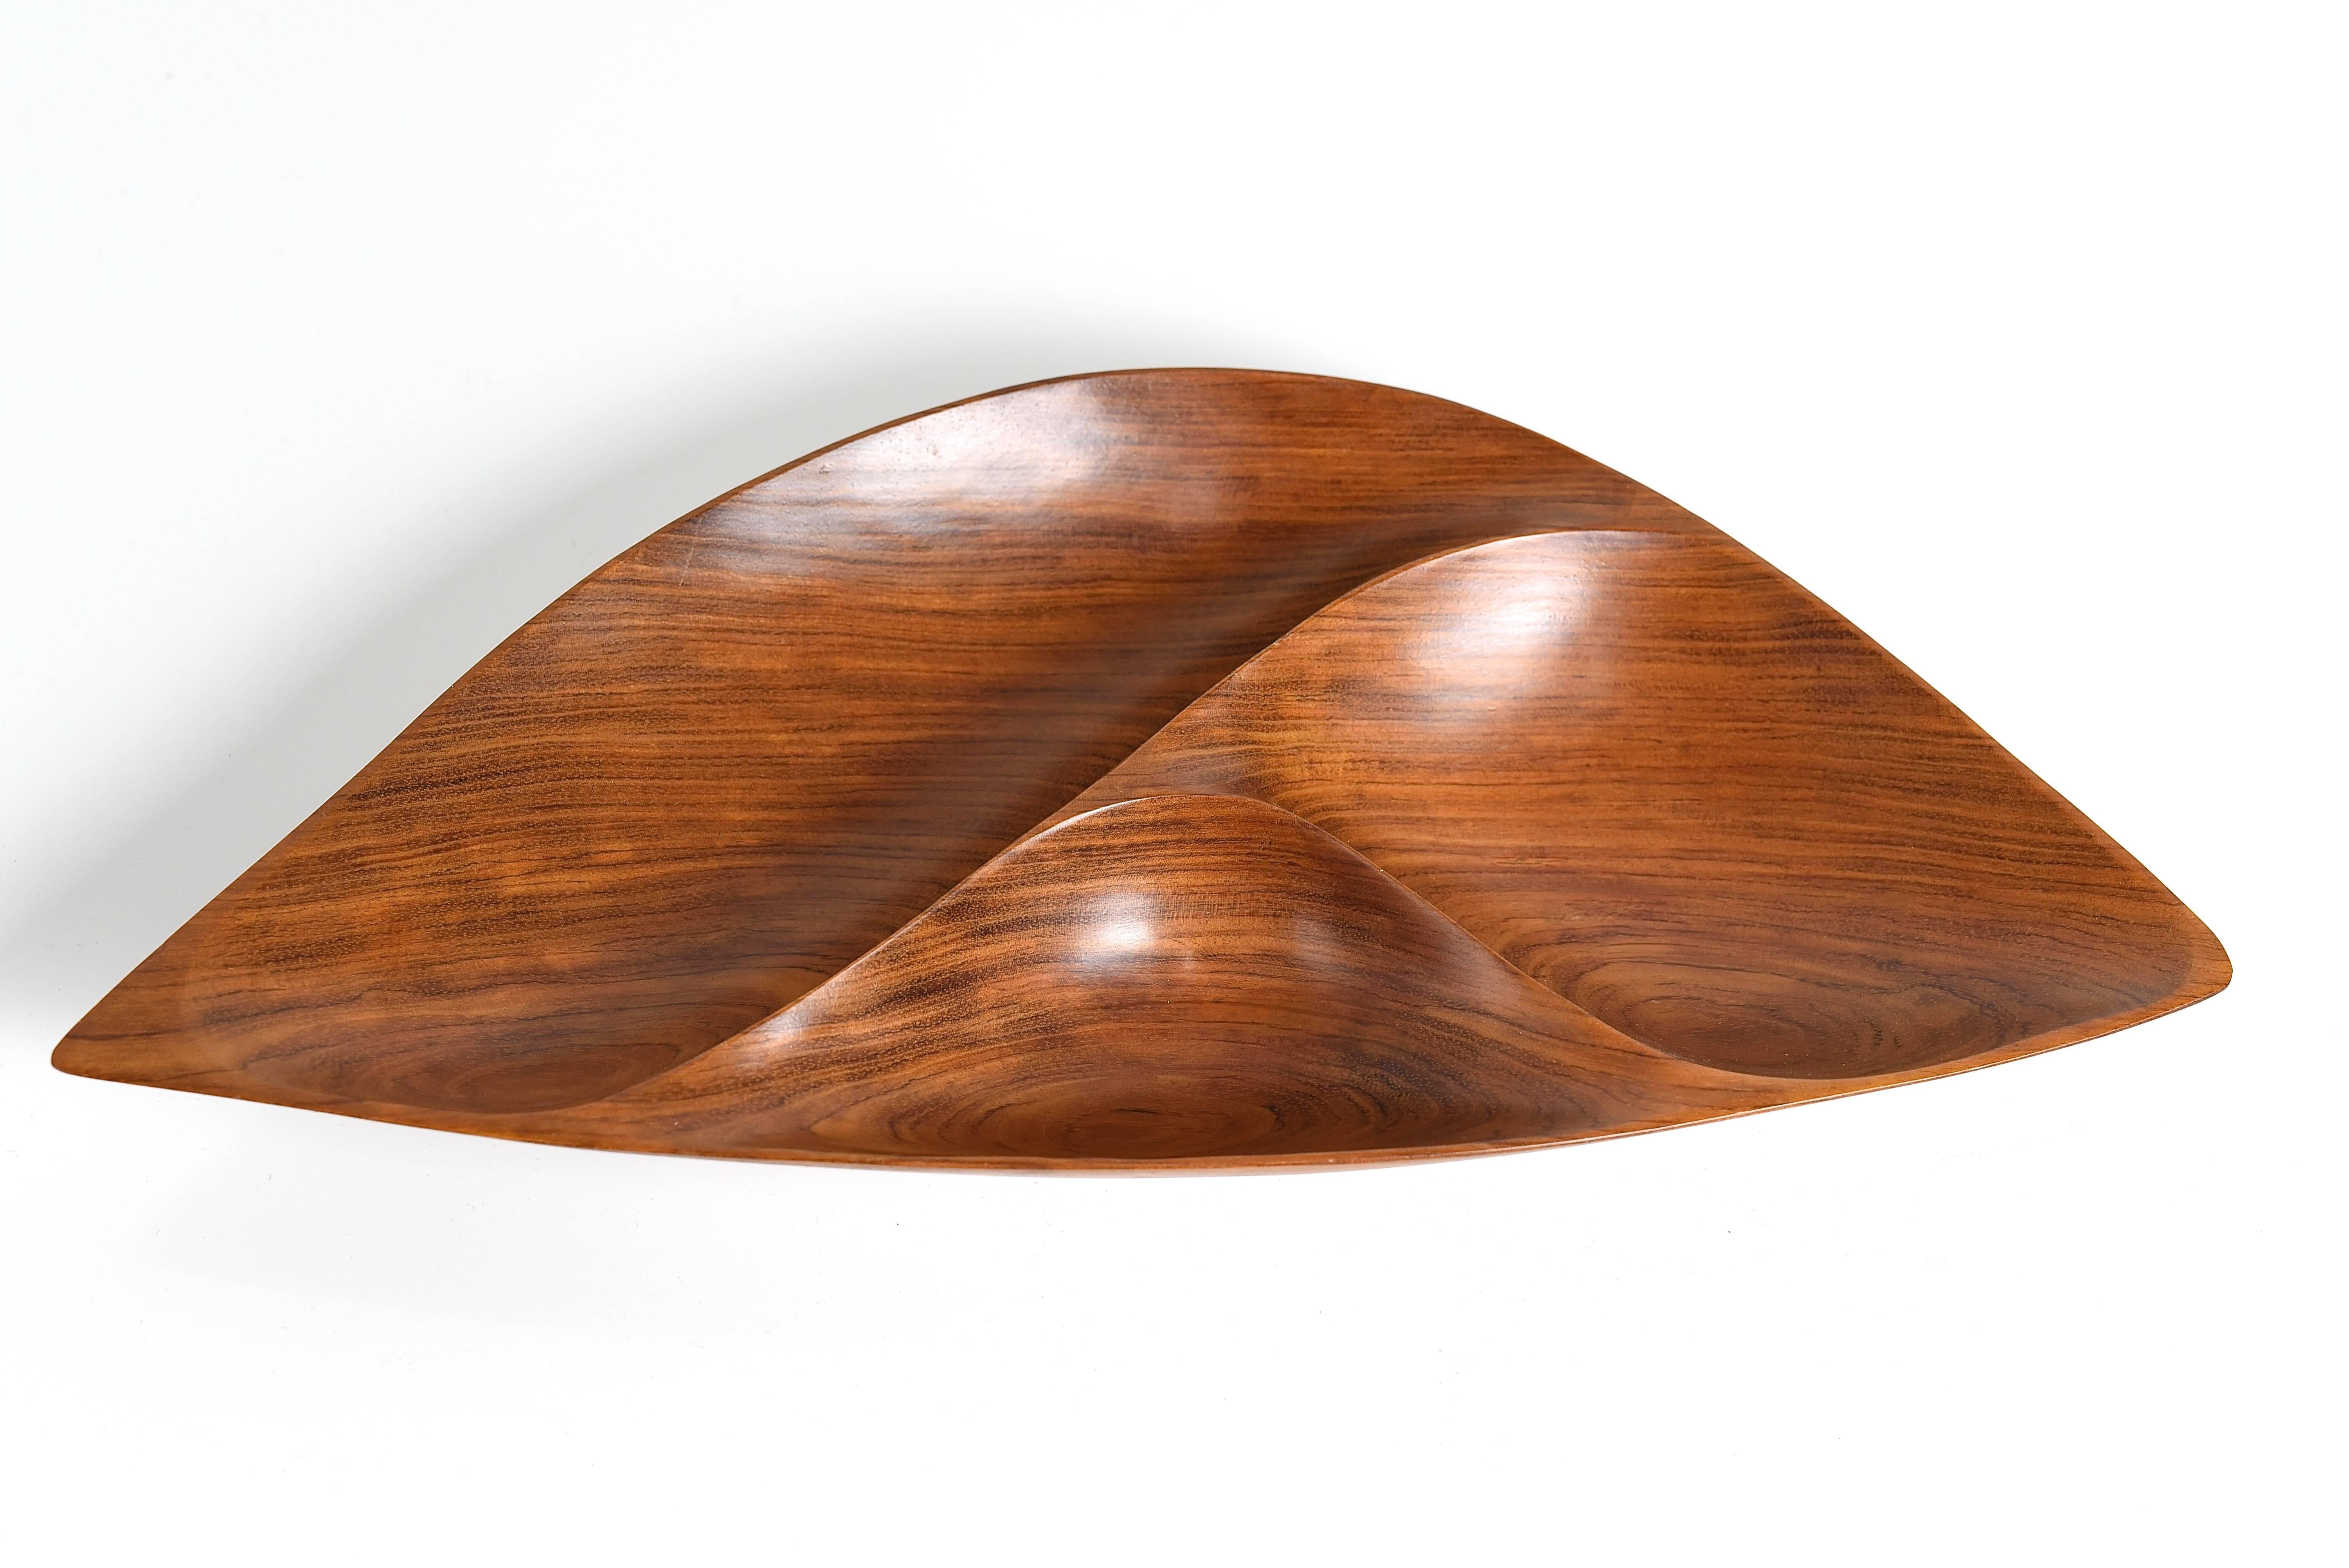 Signed Emil Milan bowl

USA, 1970s

Sculpted African rosewood

Signed to underneath.